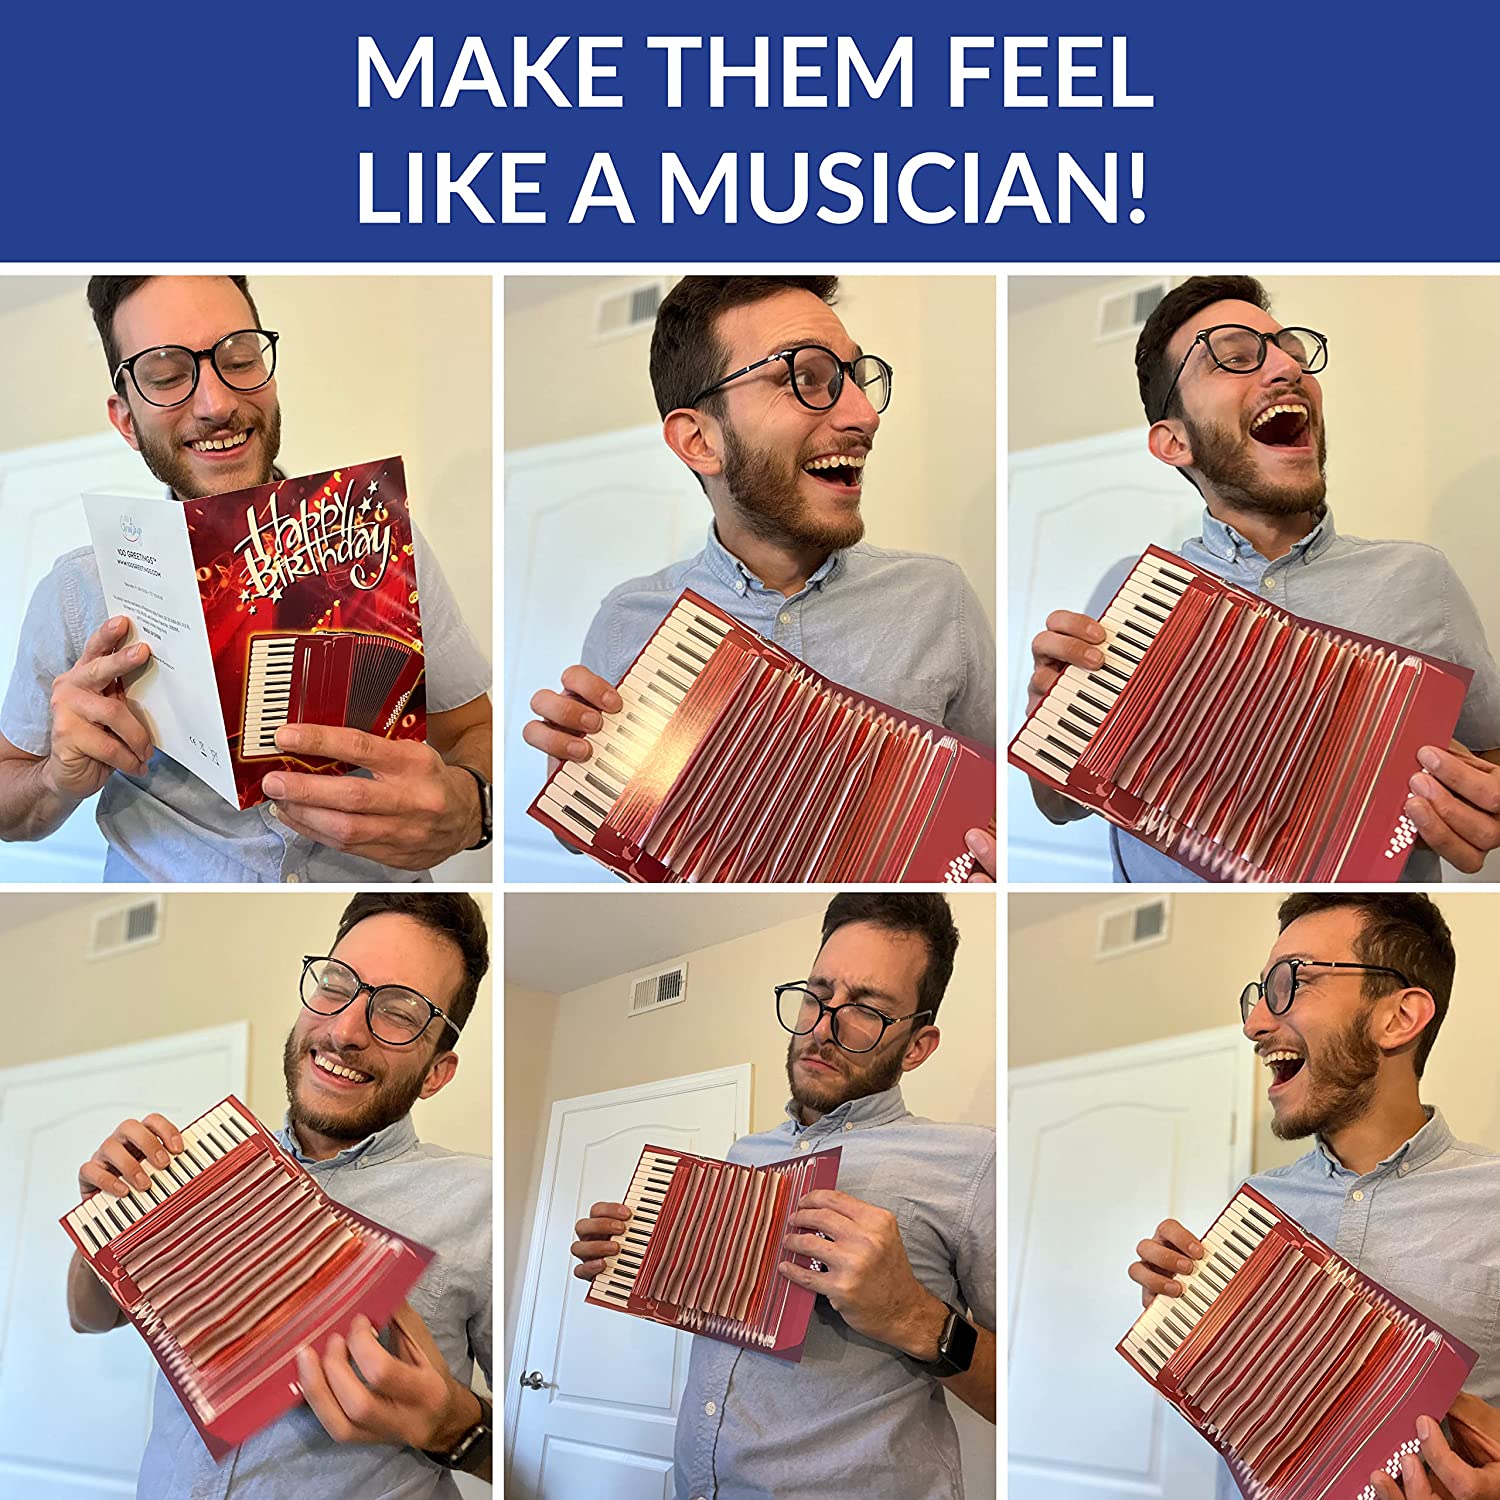 A collage of images featuring a man using an interactive accordion shaped birthday card.